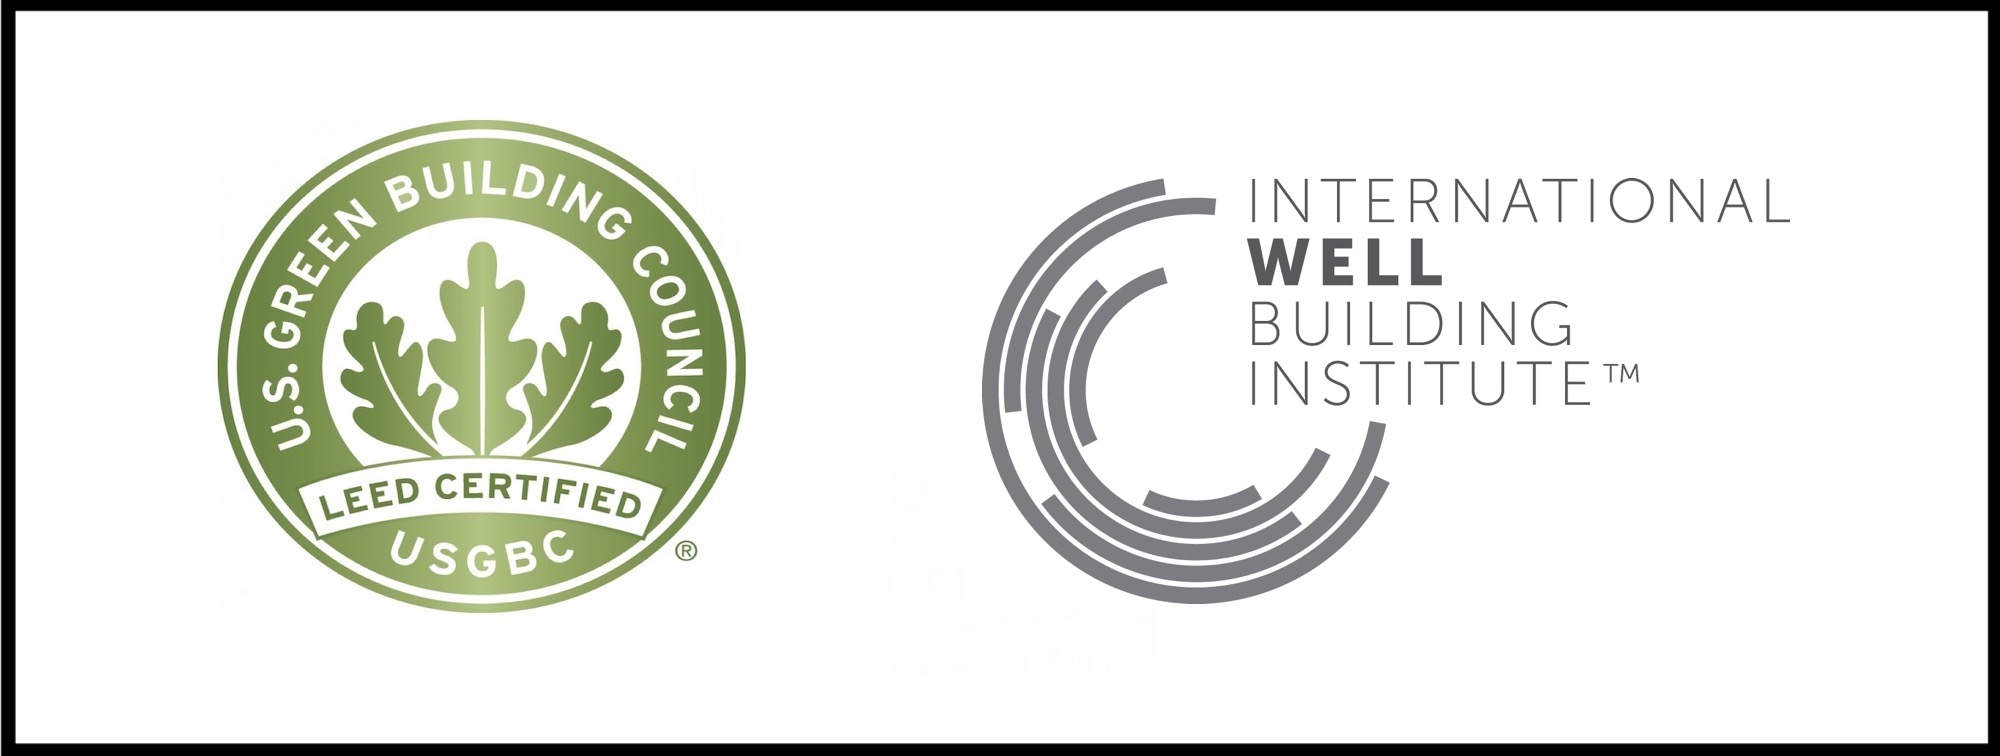 USGBC and IWBI will develop dual certification pathways for LEED and WELL